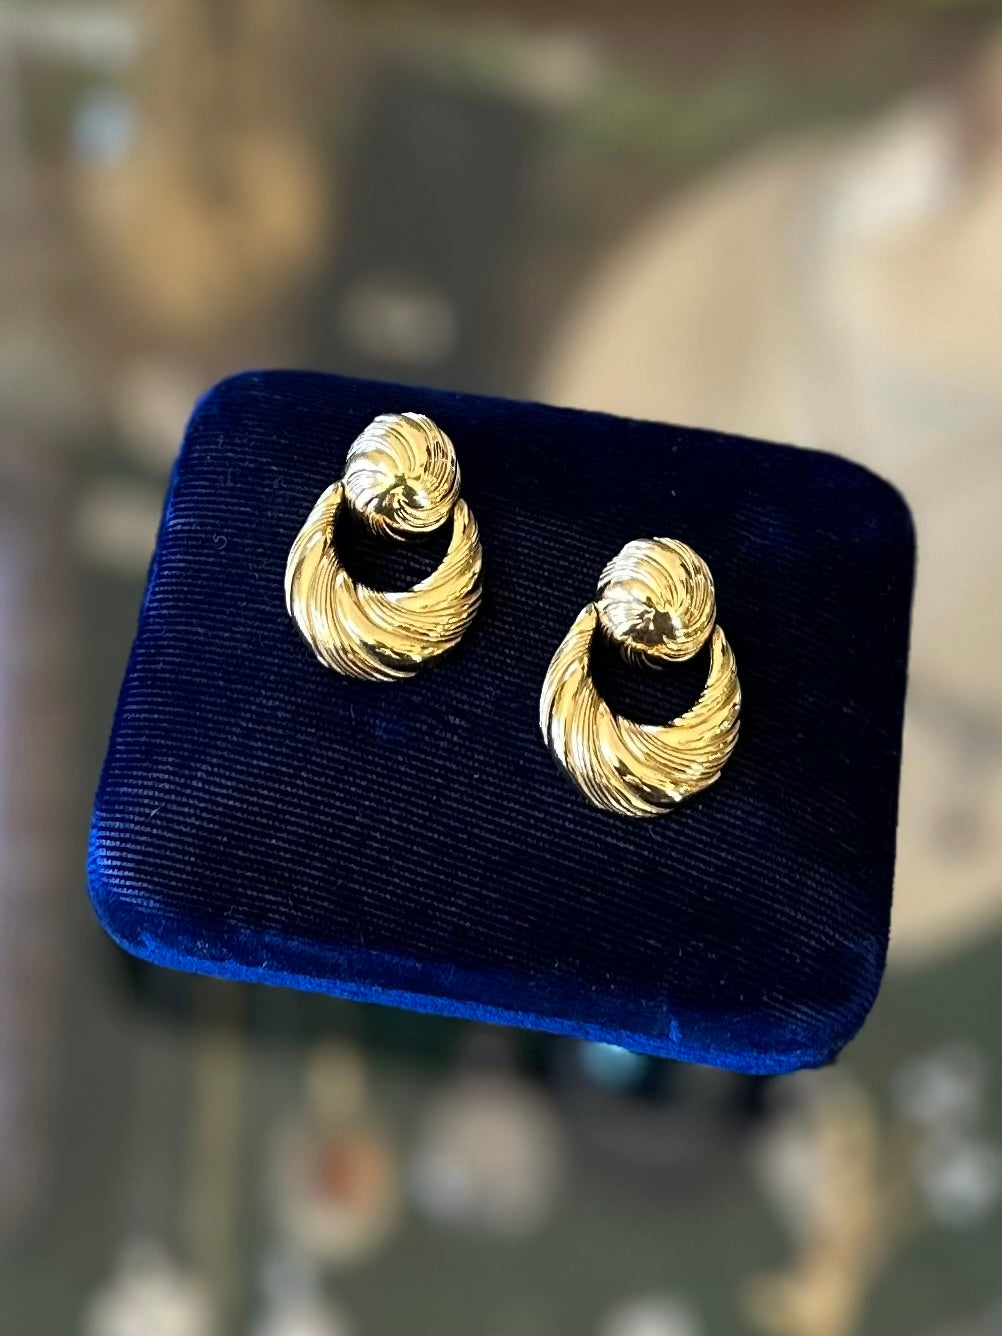 Vintage 1980s Signed GIVENCHY Gold Tone Ribbed Door Knocker Drop Pierced Earrings